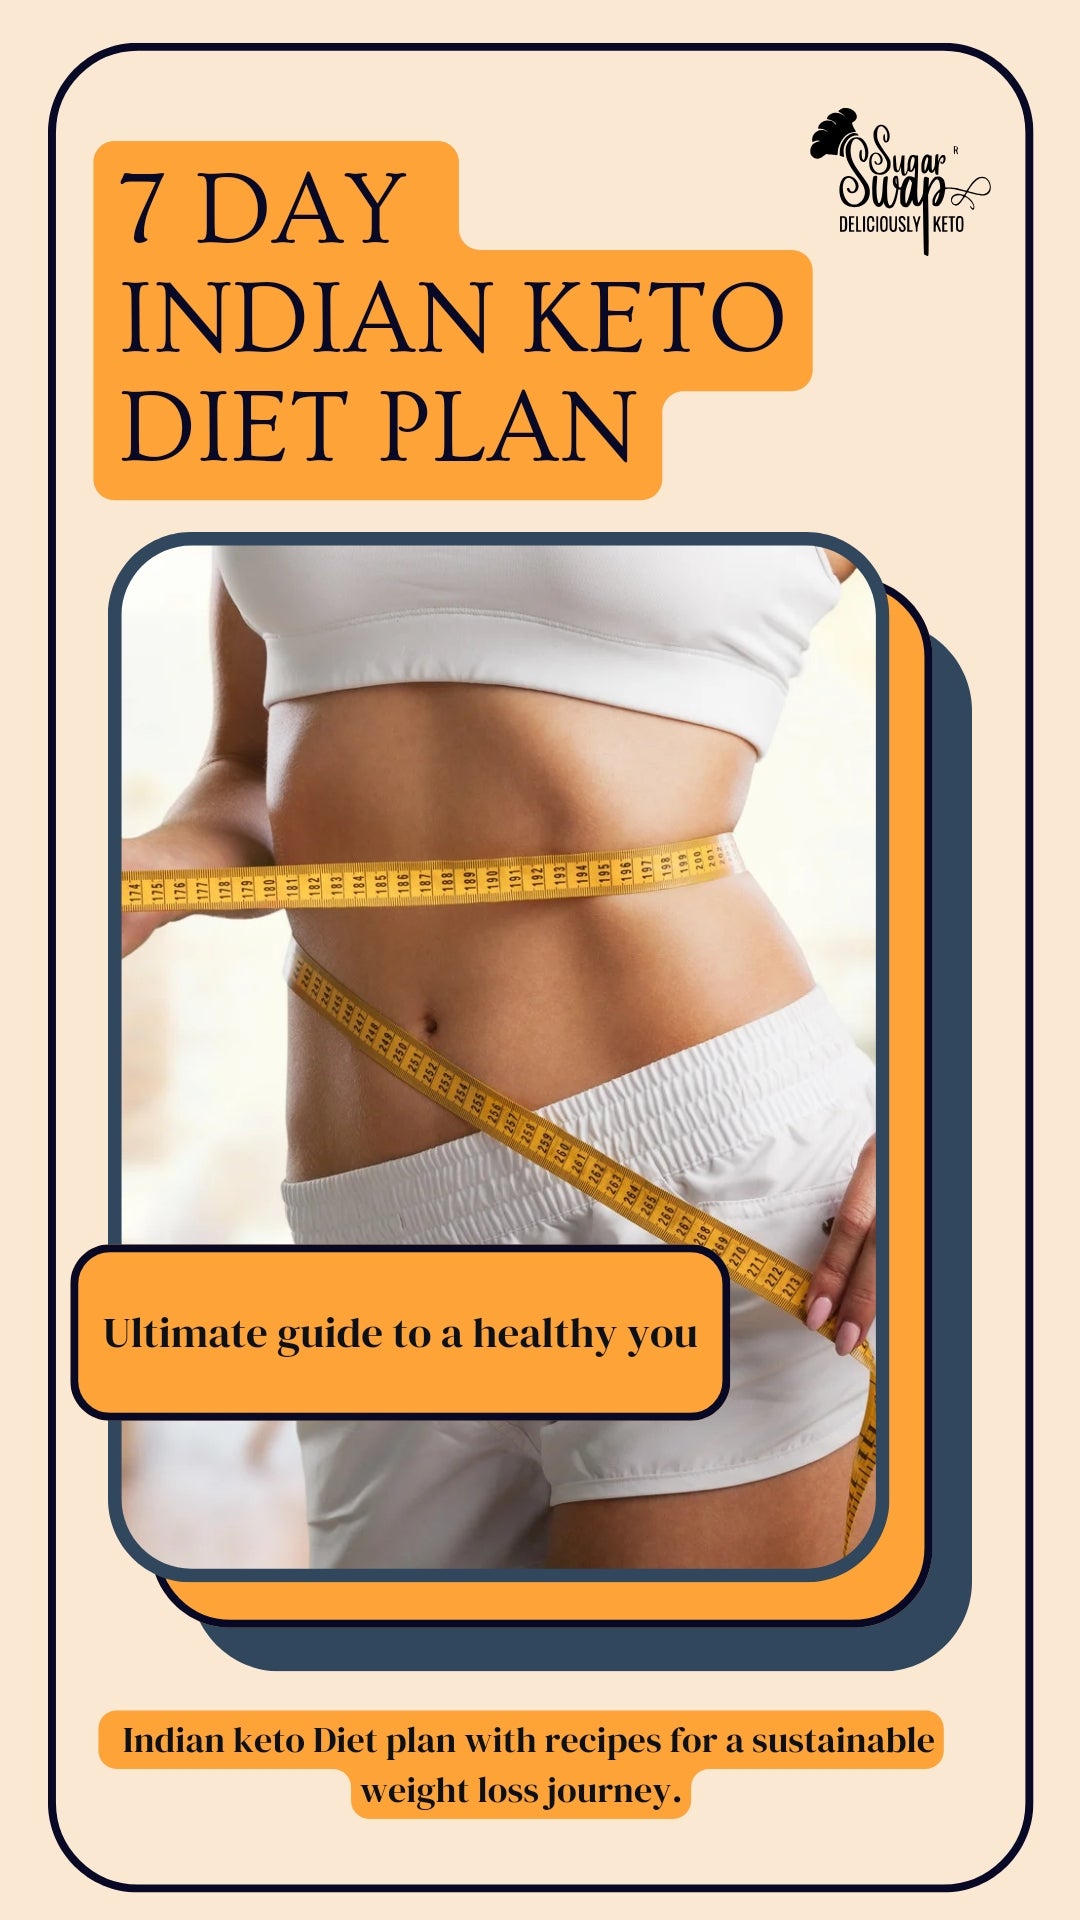 7 Day Indian keto diet plan - ebook | Weight loss